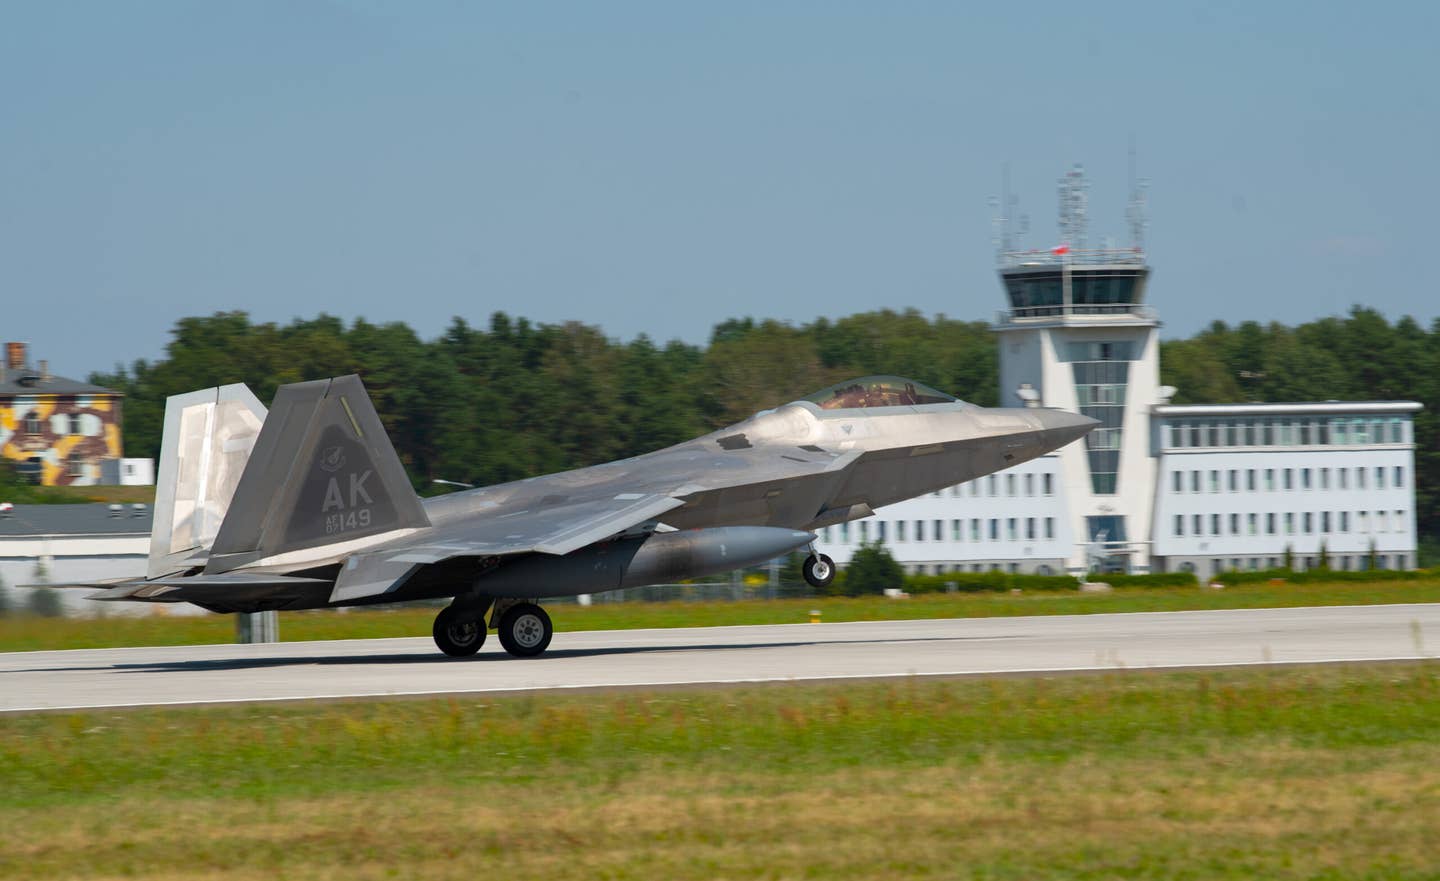 U.S. Air Force’s F-22 Raptor has arrived to the 32nd Tactical Air Base, Łask, Poland, to support NATO Air Shielding. ( Photo by U.S. Air Force SSgt Danielle Sukhlall)